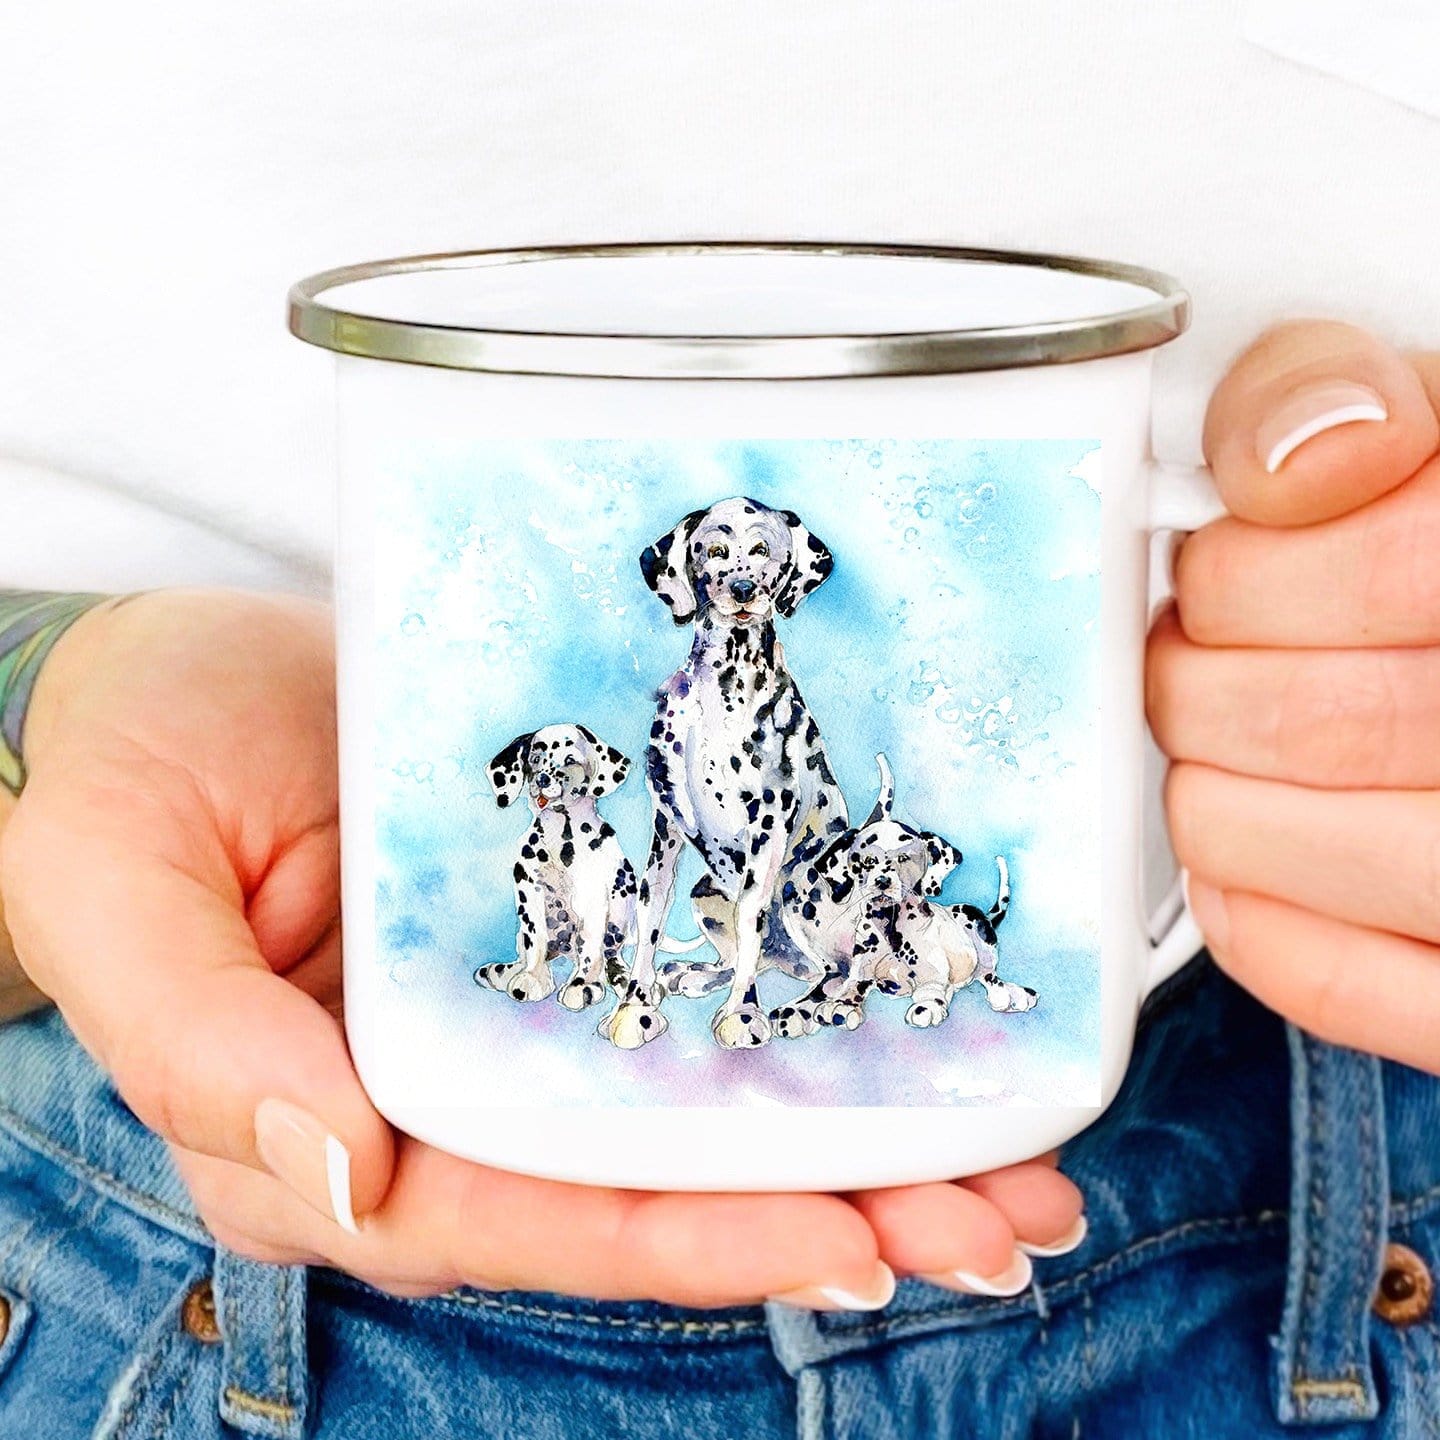 Black and White Dogs Dalmatians with puppies Enamel tin Mug designed by artist Sheila Gill
